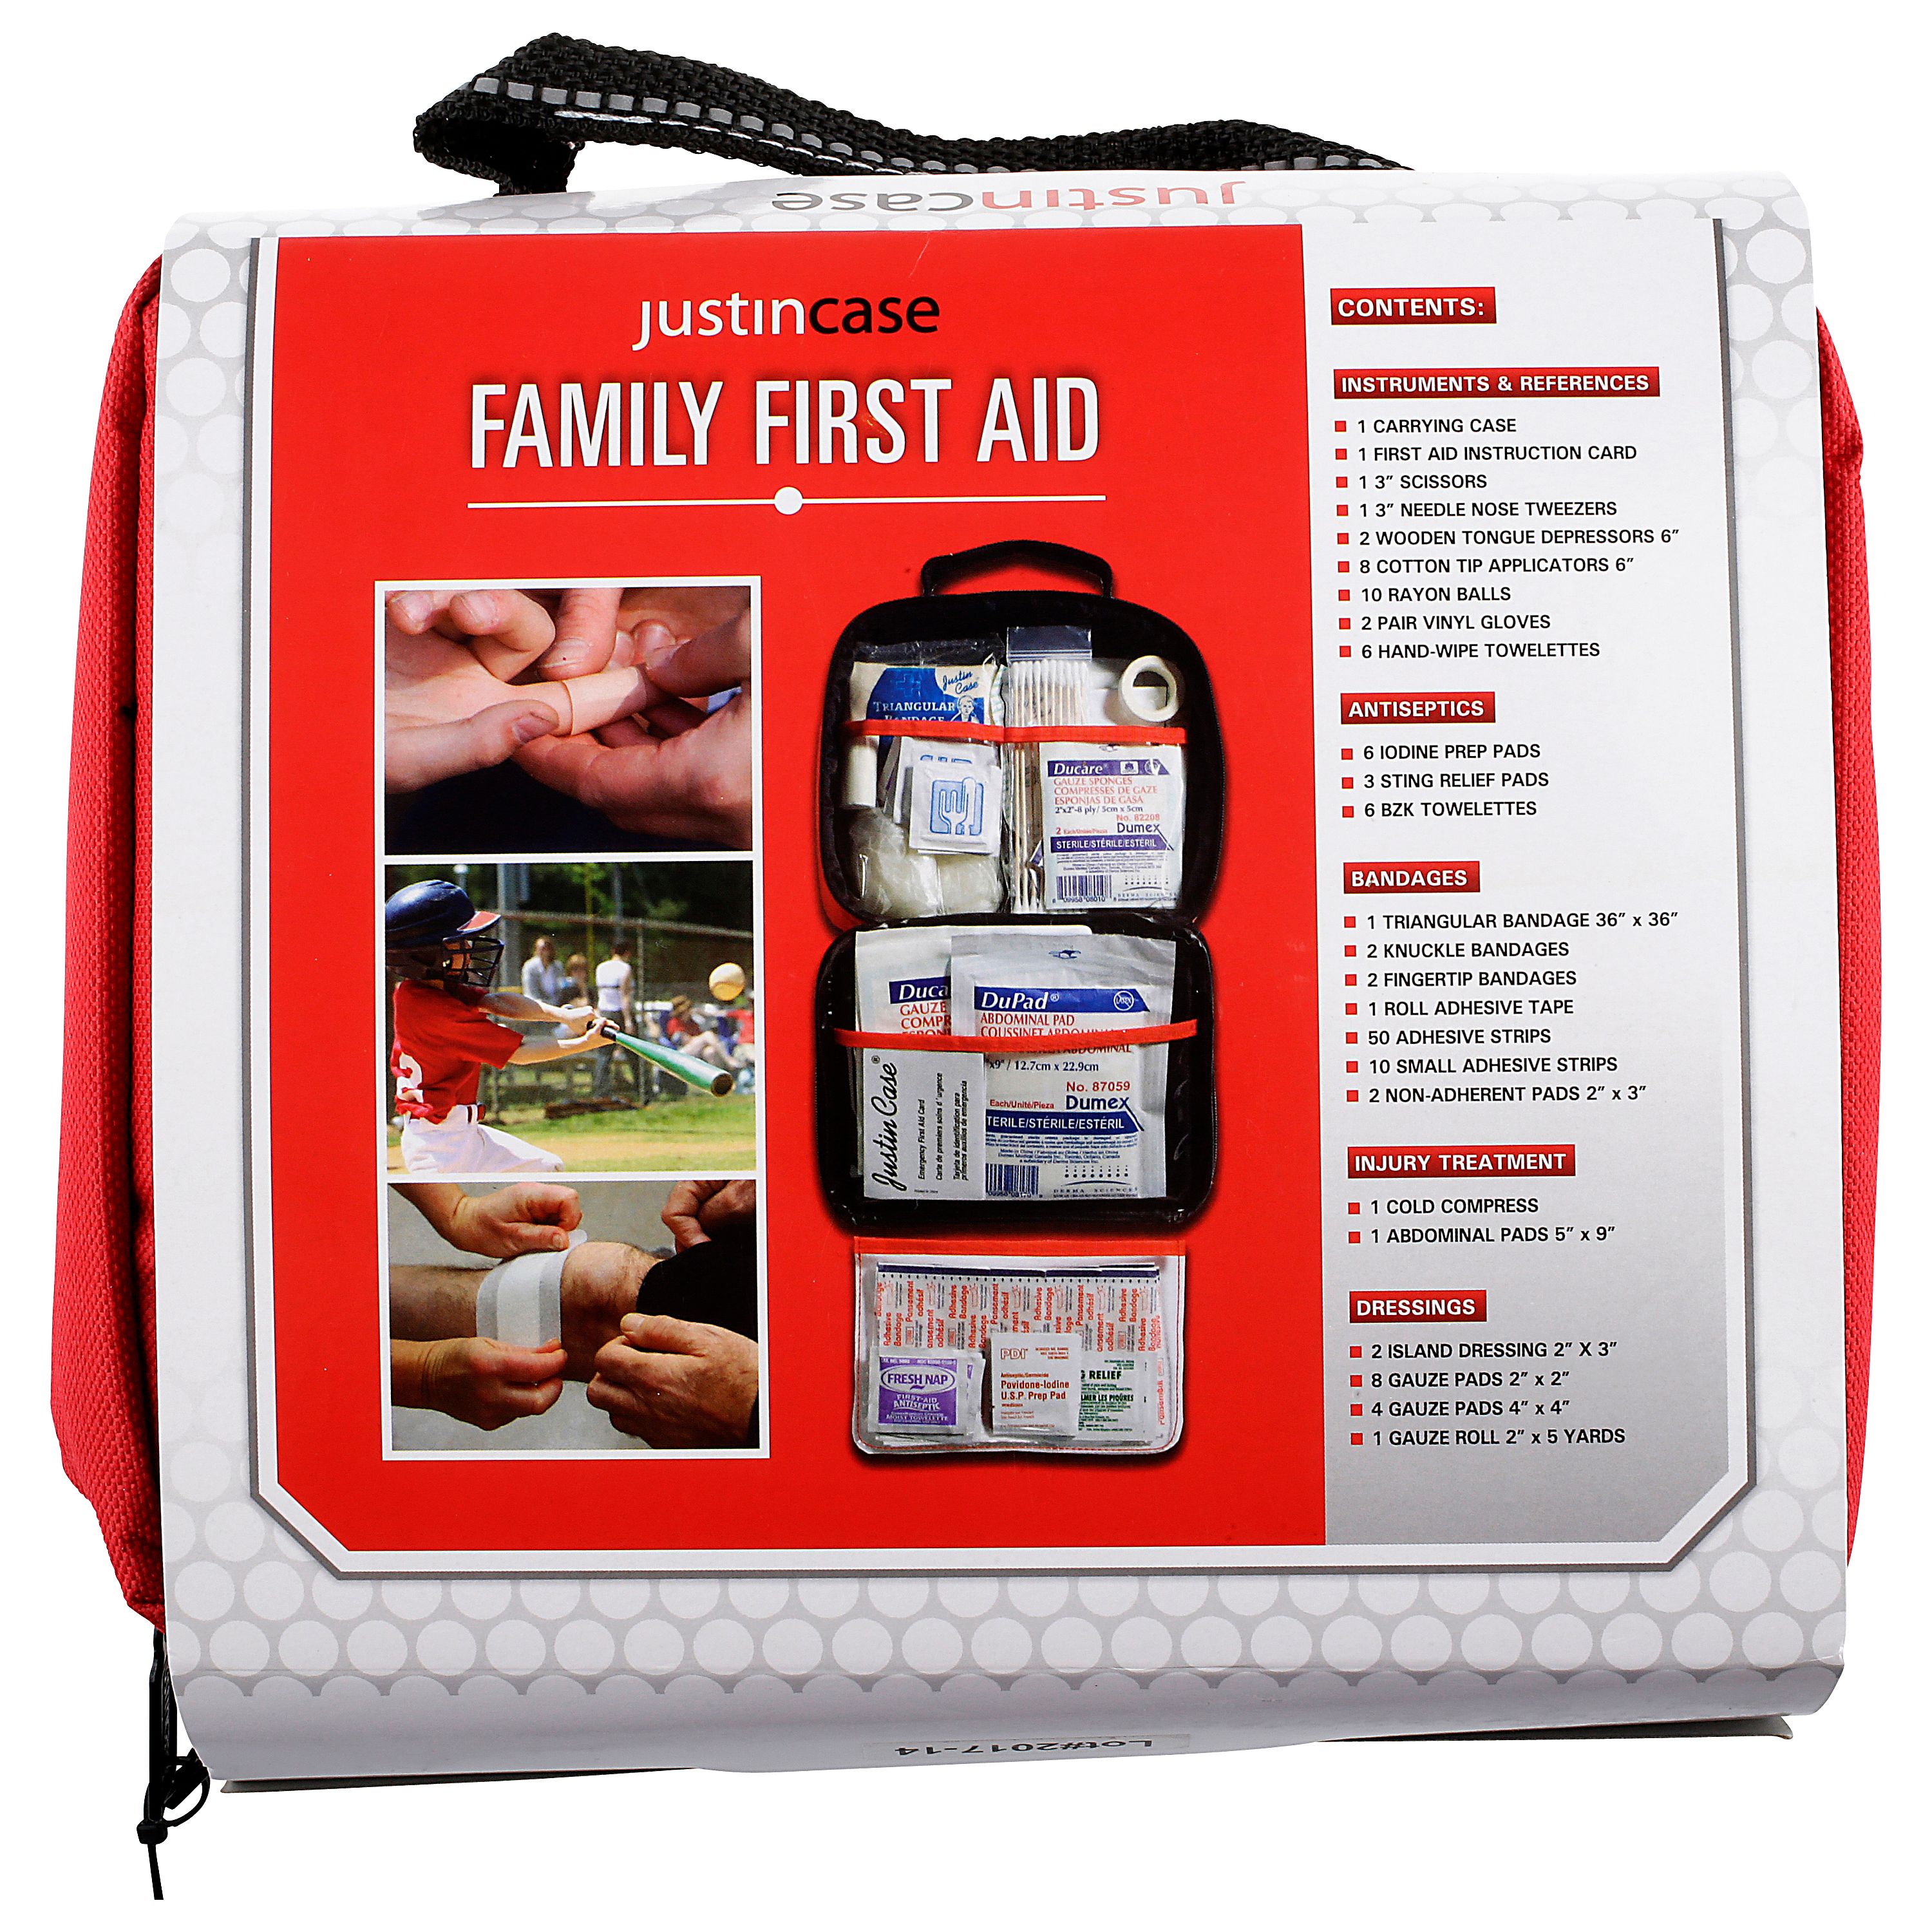 Justin Case Family First Aid Kit - image 1 of 5